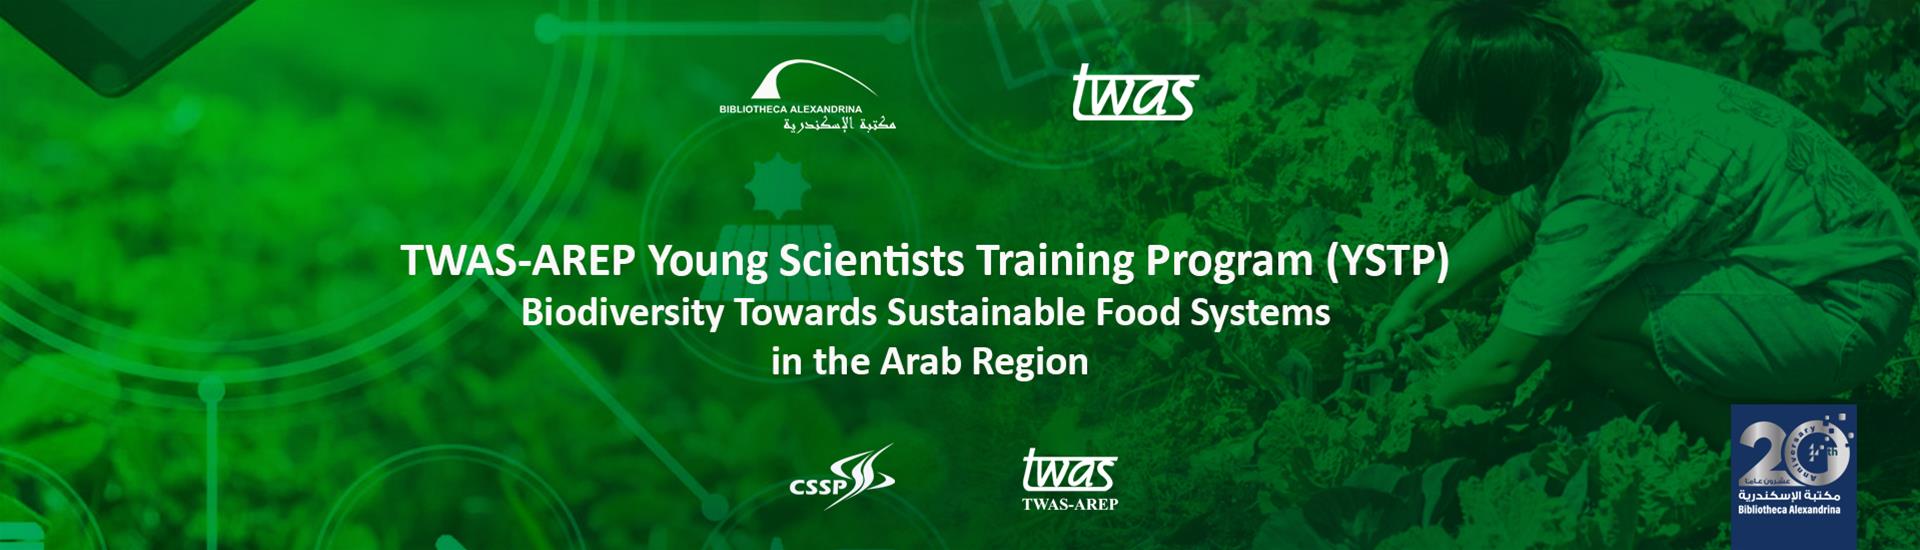 Online workshop with the theme “Biodiversity Towards Sustainable Food Systems in the Arab Region” 